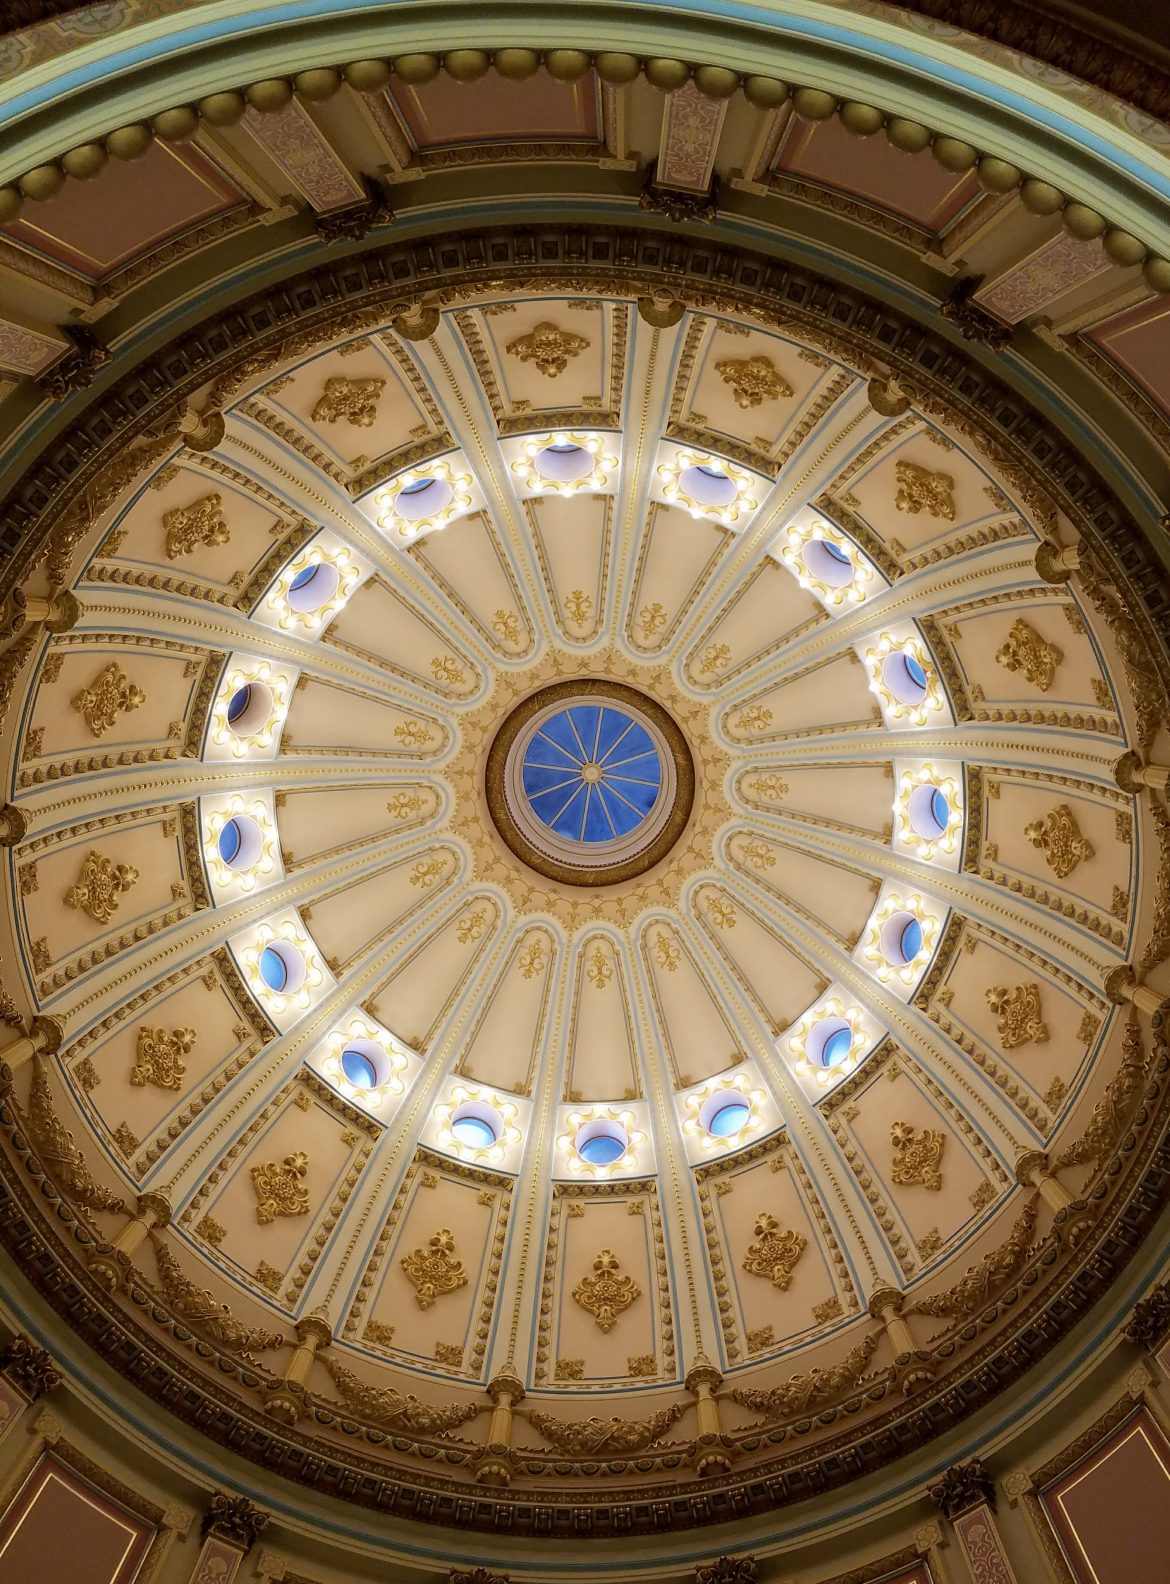 view of the State Capitol dome from the inside looking upward